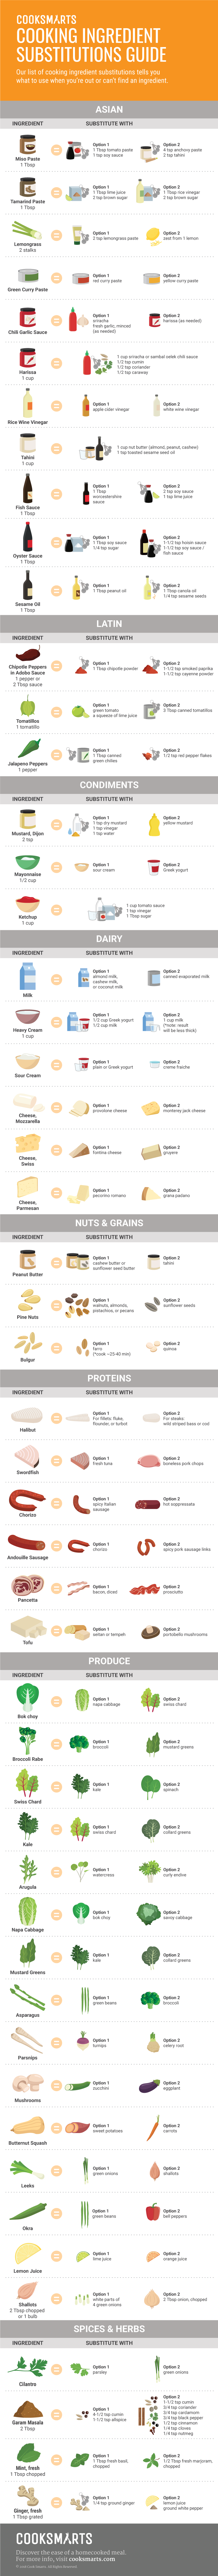 Cooking Ingredient Substitutions Guide Infographic | @cooksmarts